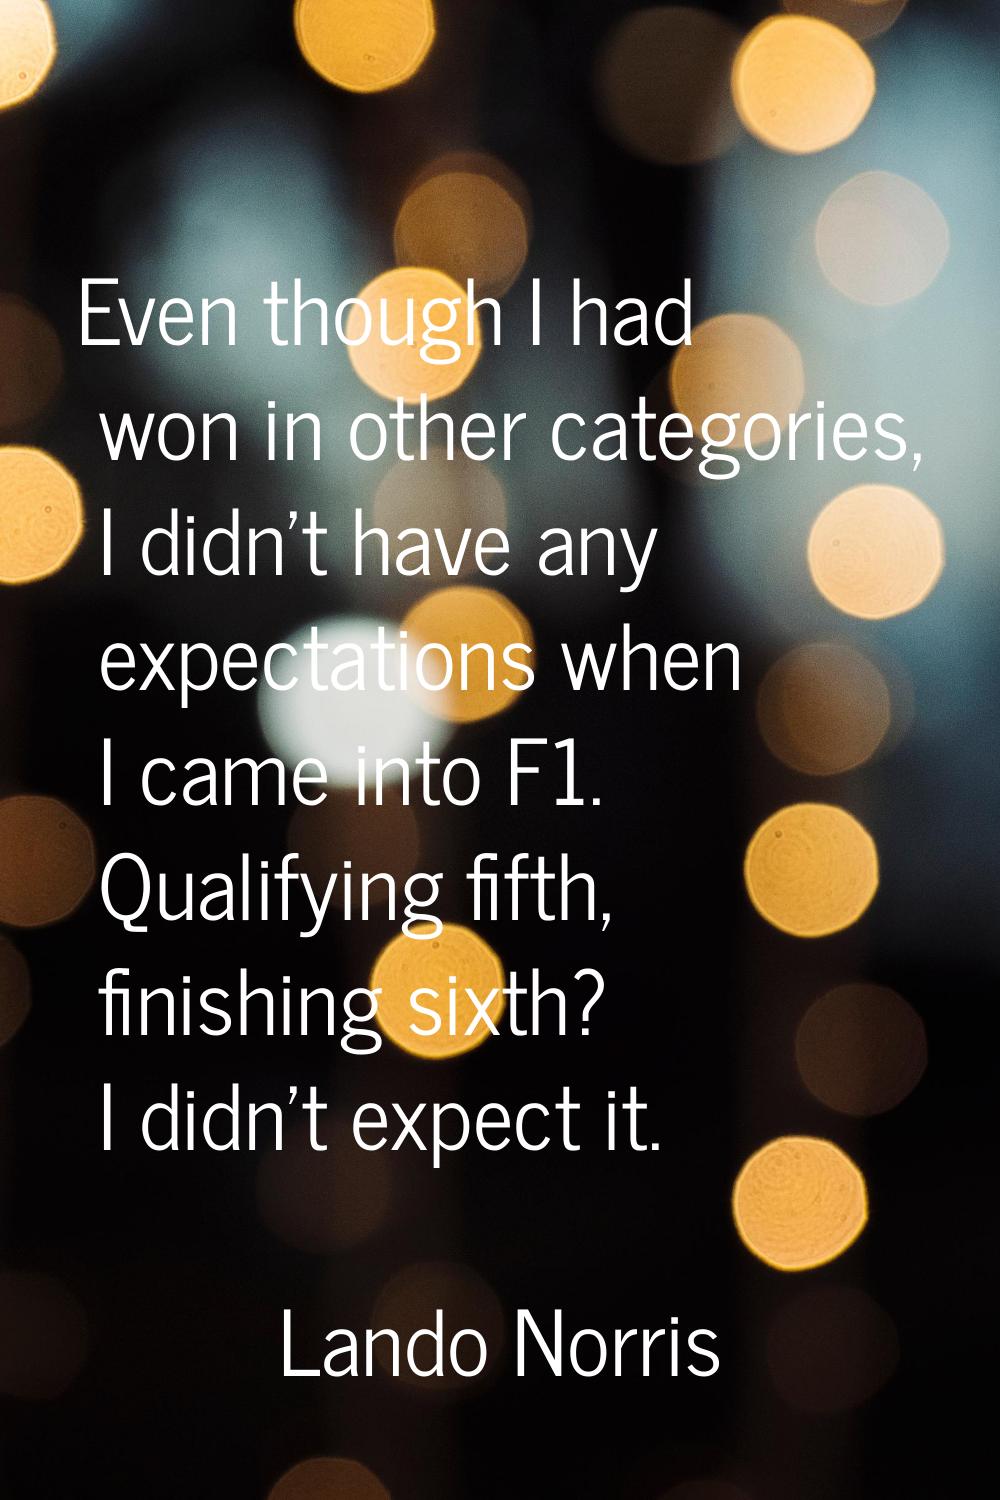 Even though I had won in other categories, I didn't have any expectations when I came into F1. Qual